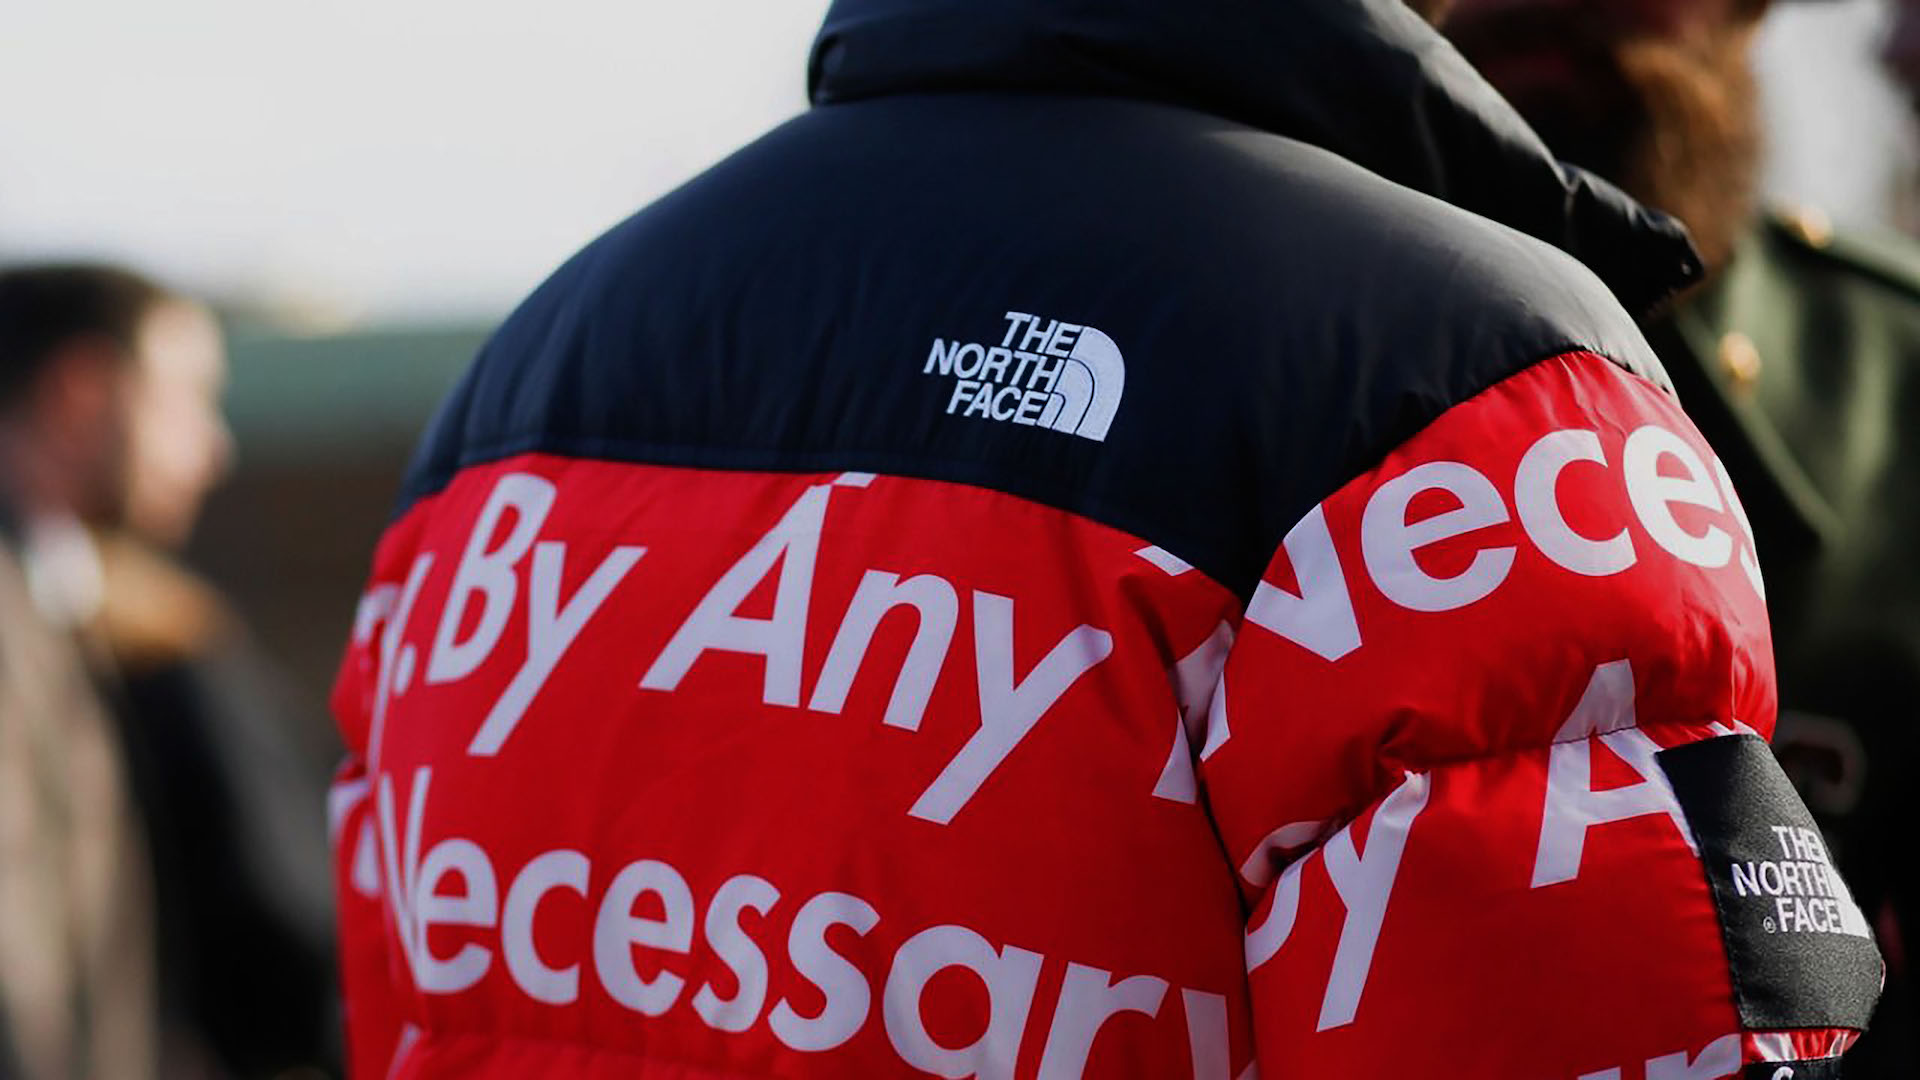 The North Face brings cognitive computing to e-commerce - Outside Insight